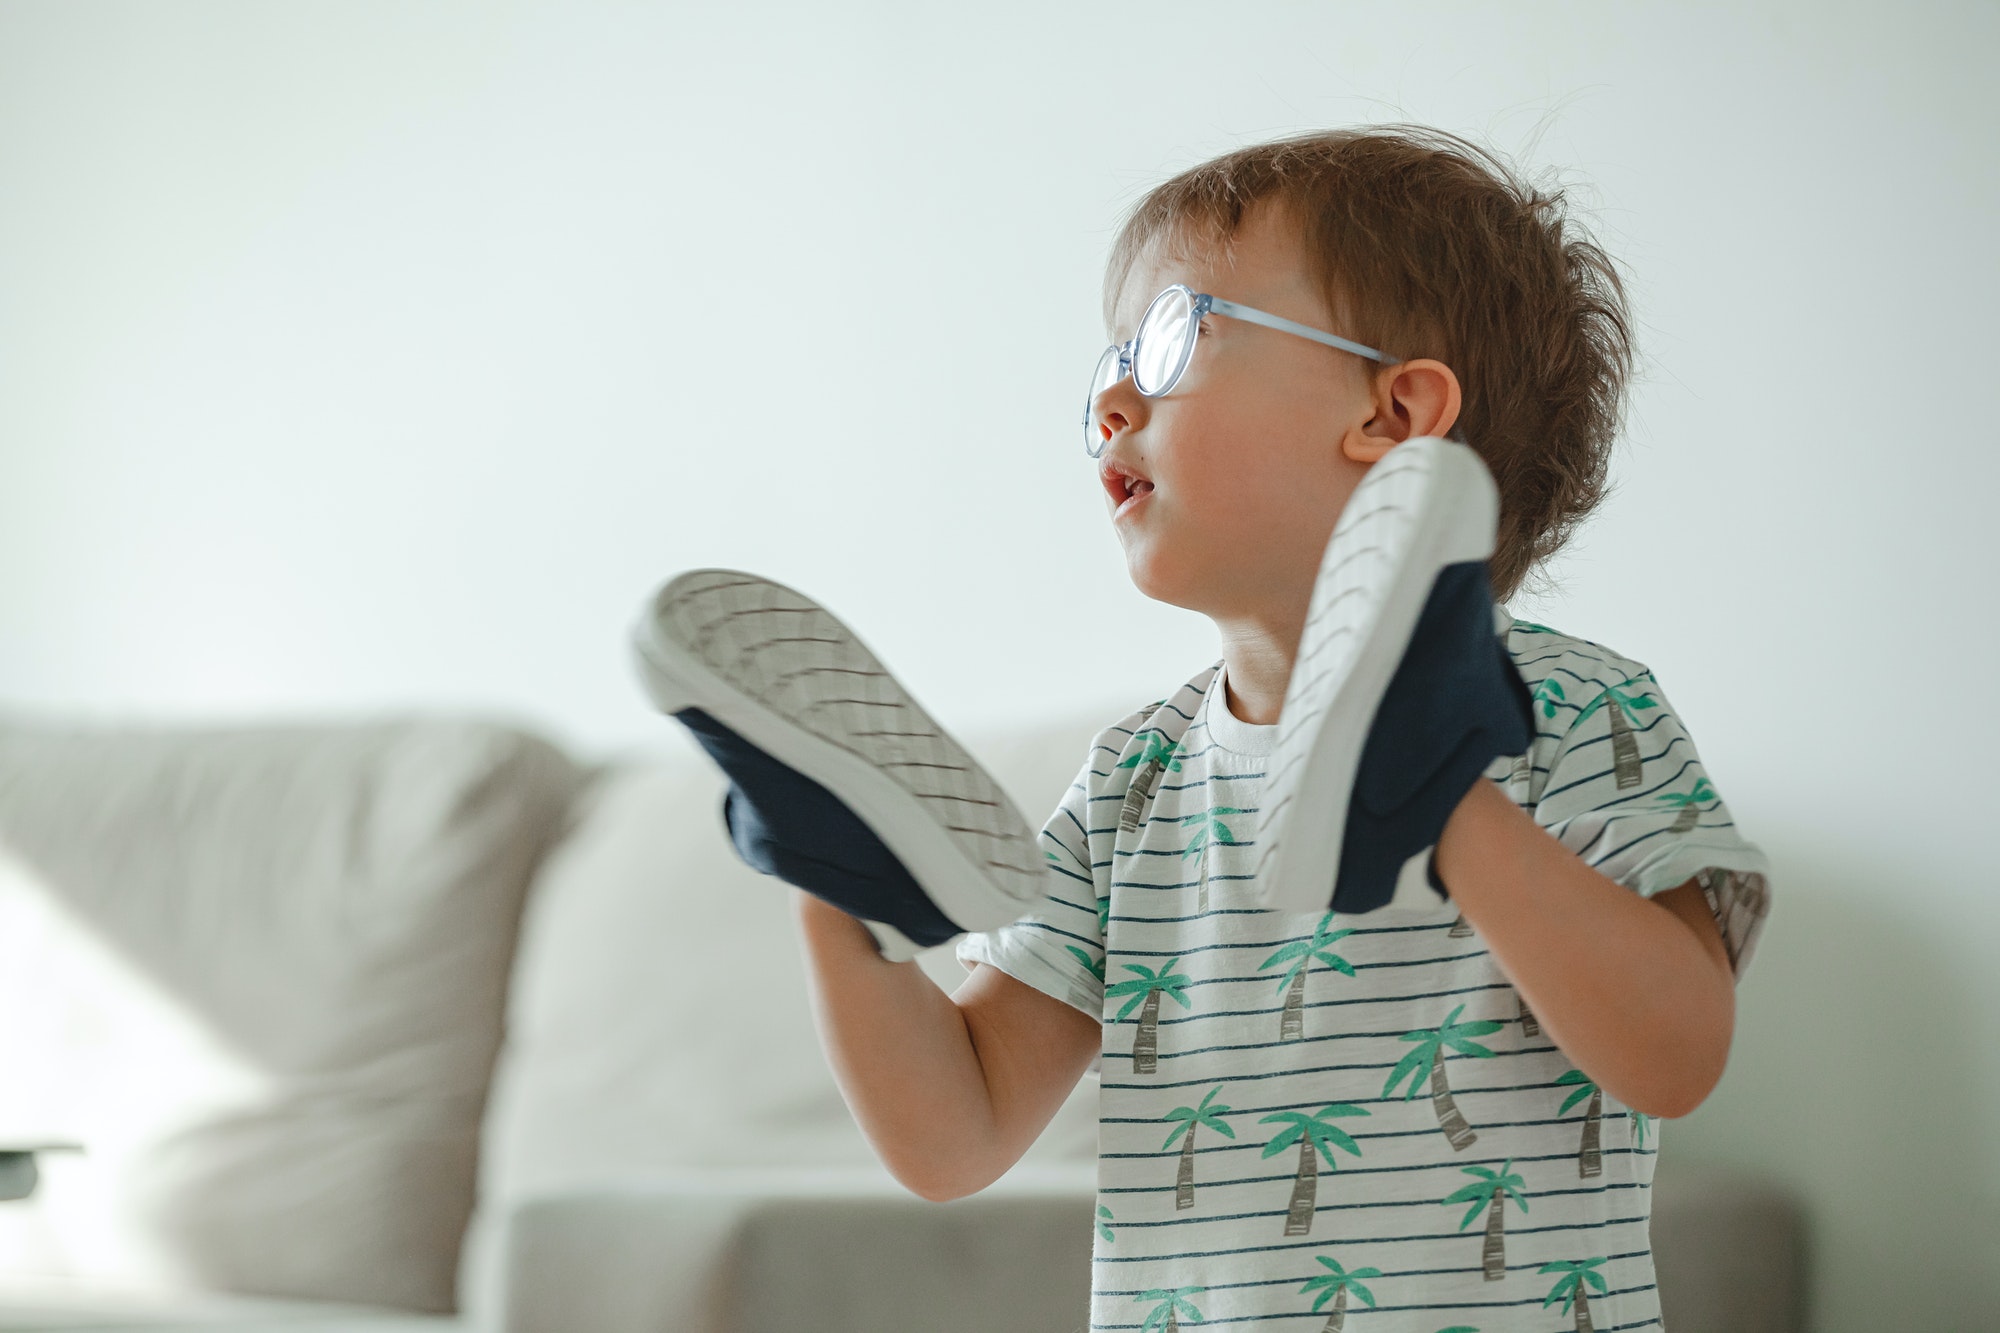 Child with autism in glasses play with his shoes